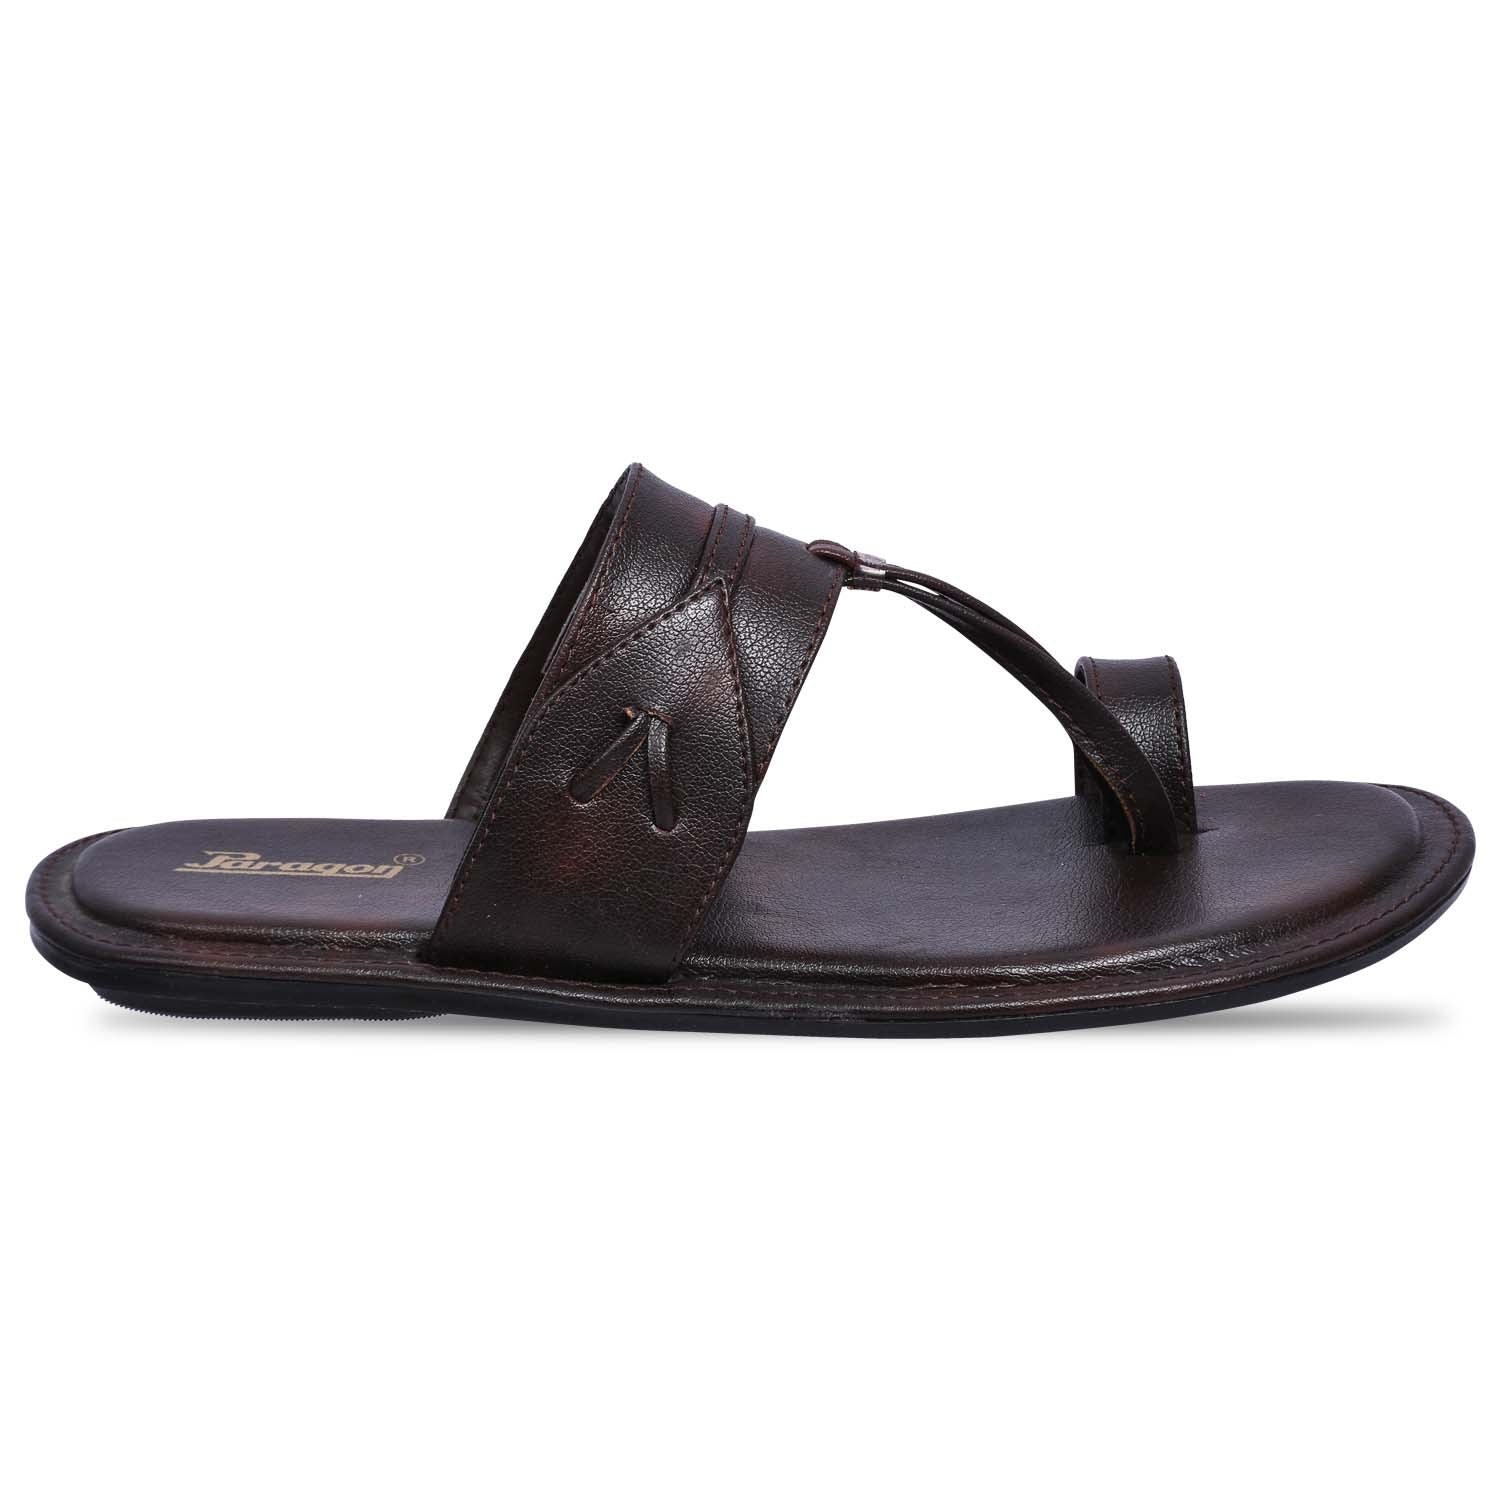 Paragon R4001G Men Stylish Sandals | Comfortable Sandals for Daily Outdoor Use | Casual Formal Sandals with Cushioned Soles